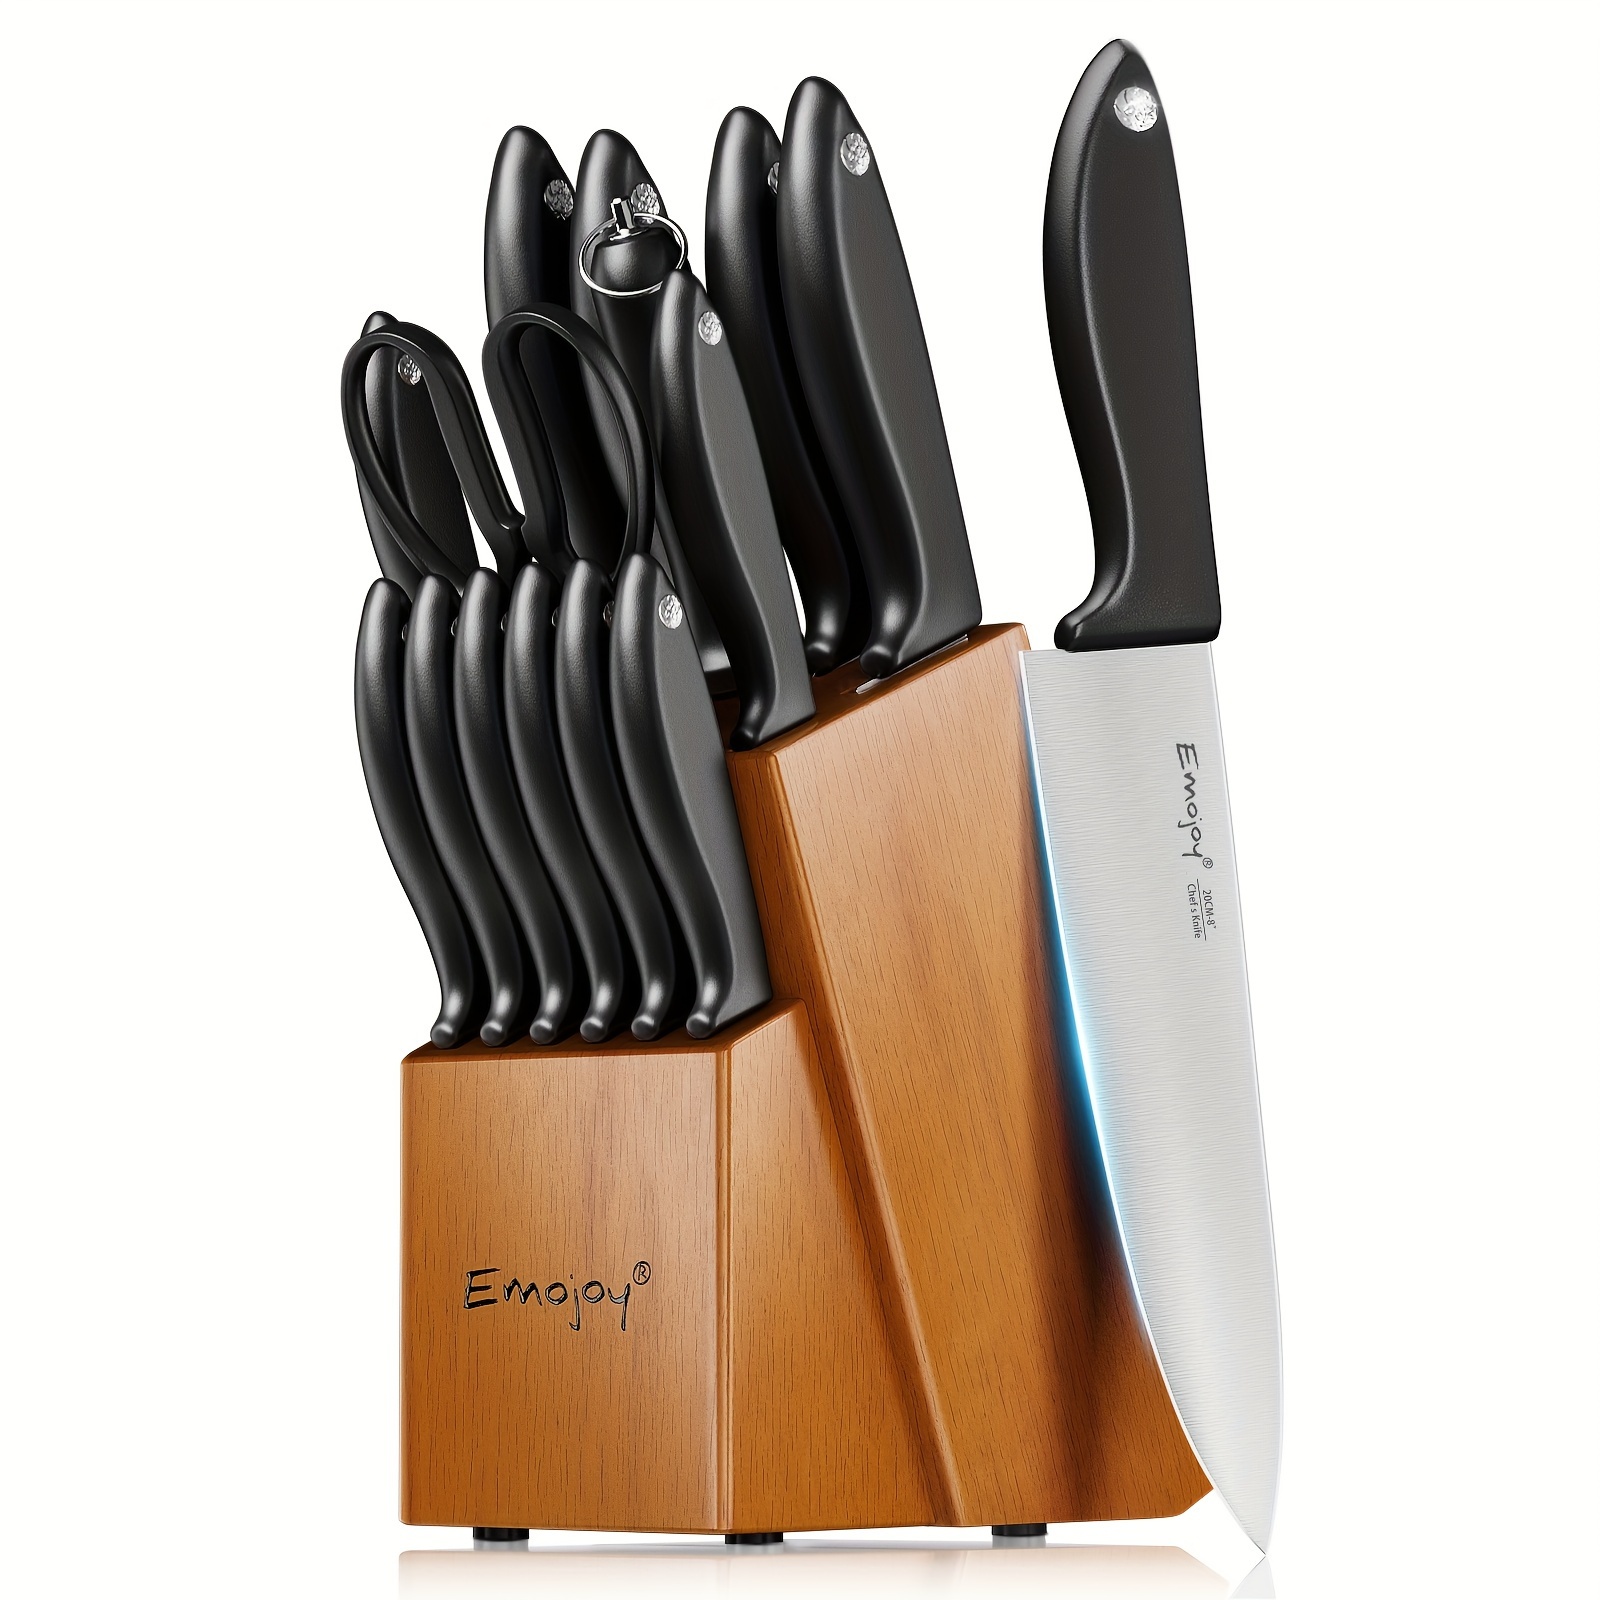 

15pcs, Knife Set, Stainless Steel Chef Knives With Ergonomic Pp Handles, Ultra-sharp Edge, Includes Chef Knife, Bread Knife, Paring Knife, Shears & Wooden Block, Black